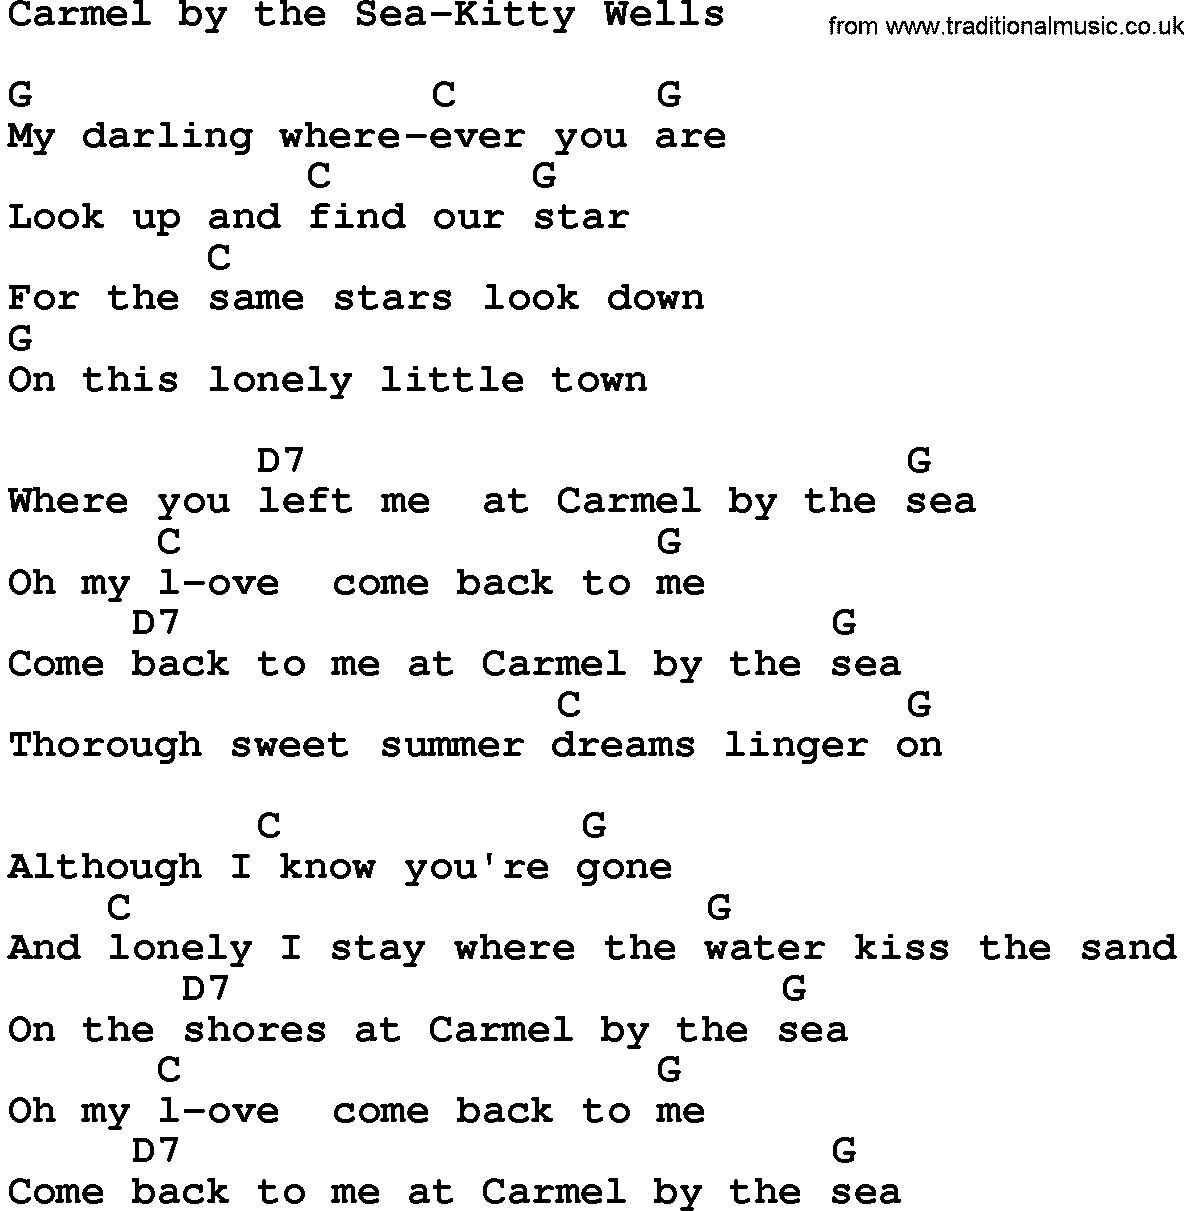 Country music song: Carmel By The Sea-Kitty Wells lyrics and chords